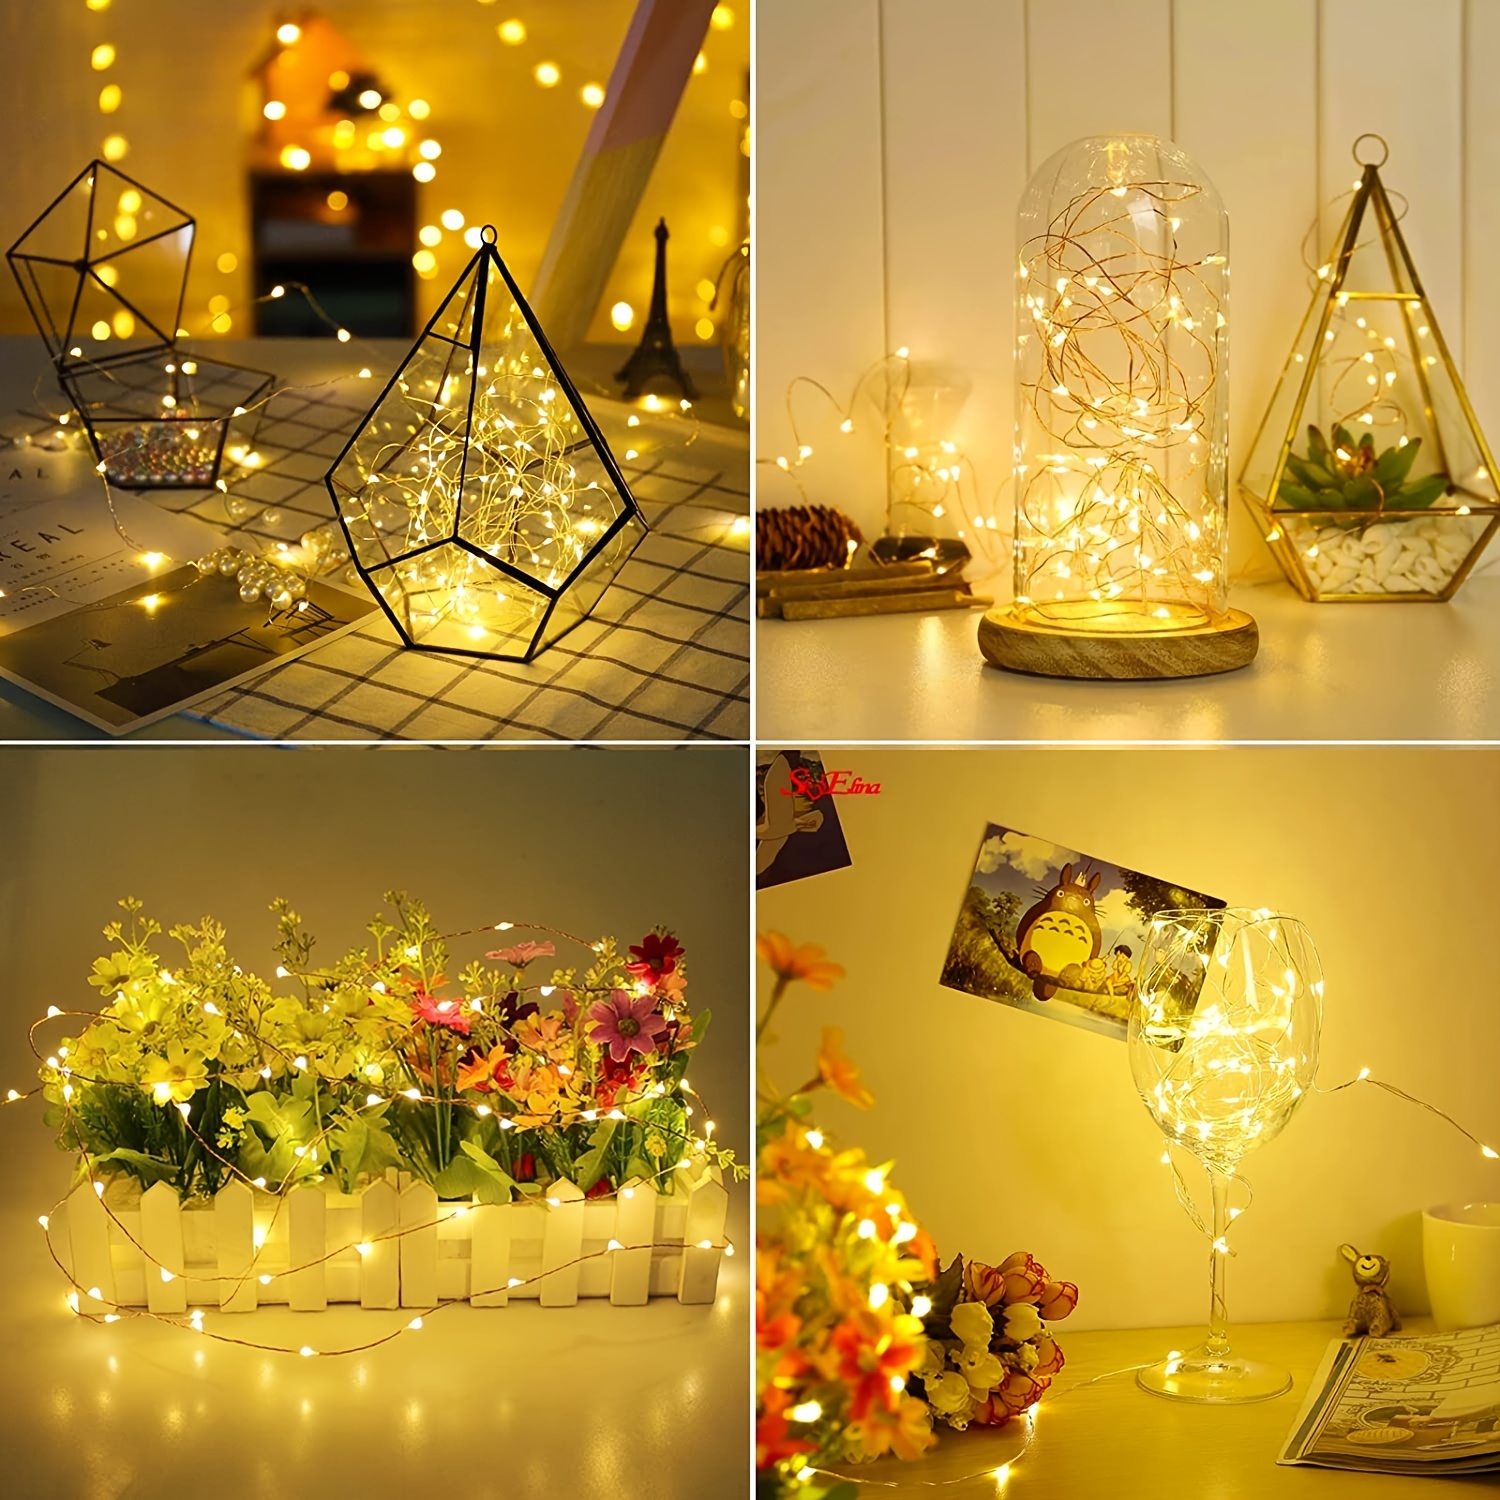 10 mini led string lights battery operated waterproof starry firefly lights perfect for home decor weddings details 6